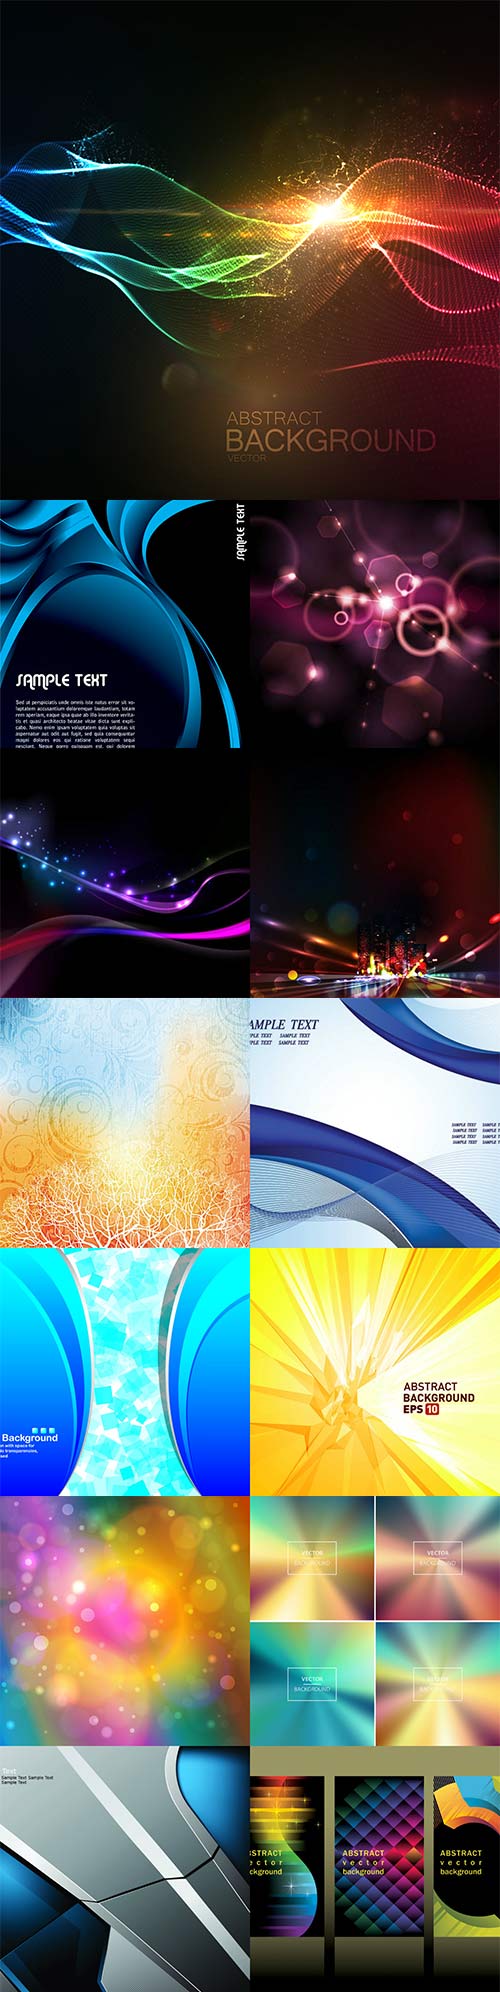 Bright colorful abstract backgrounds vector -47